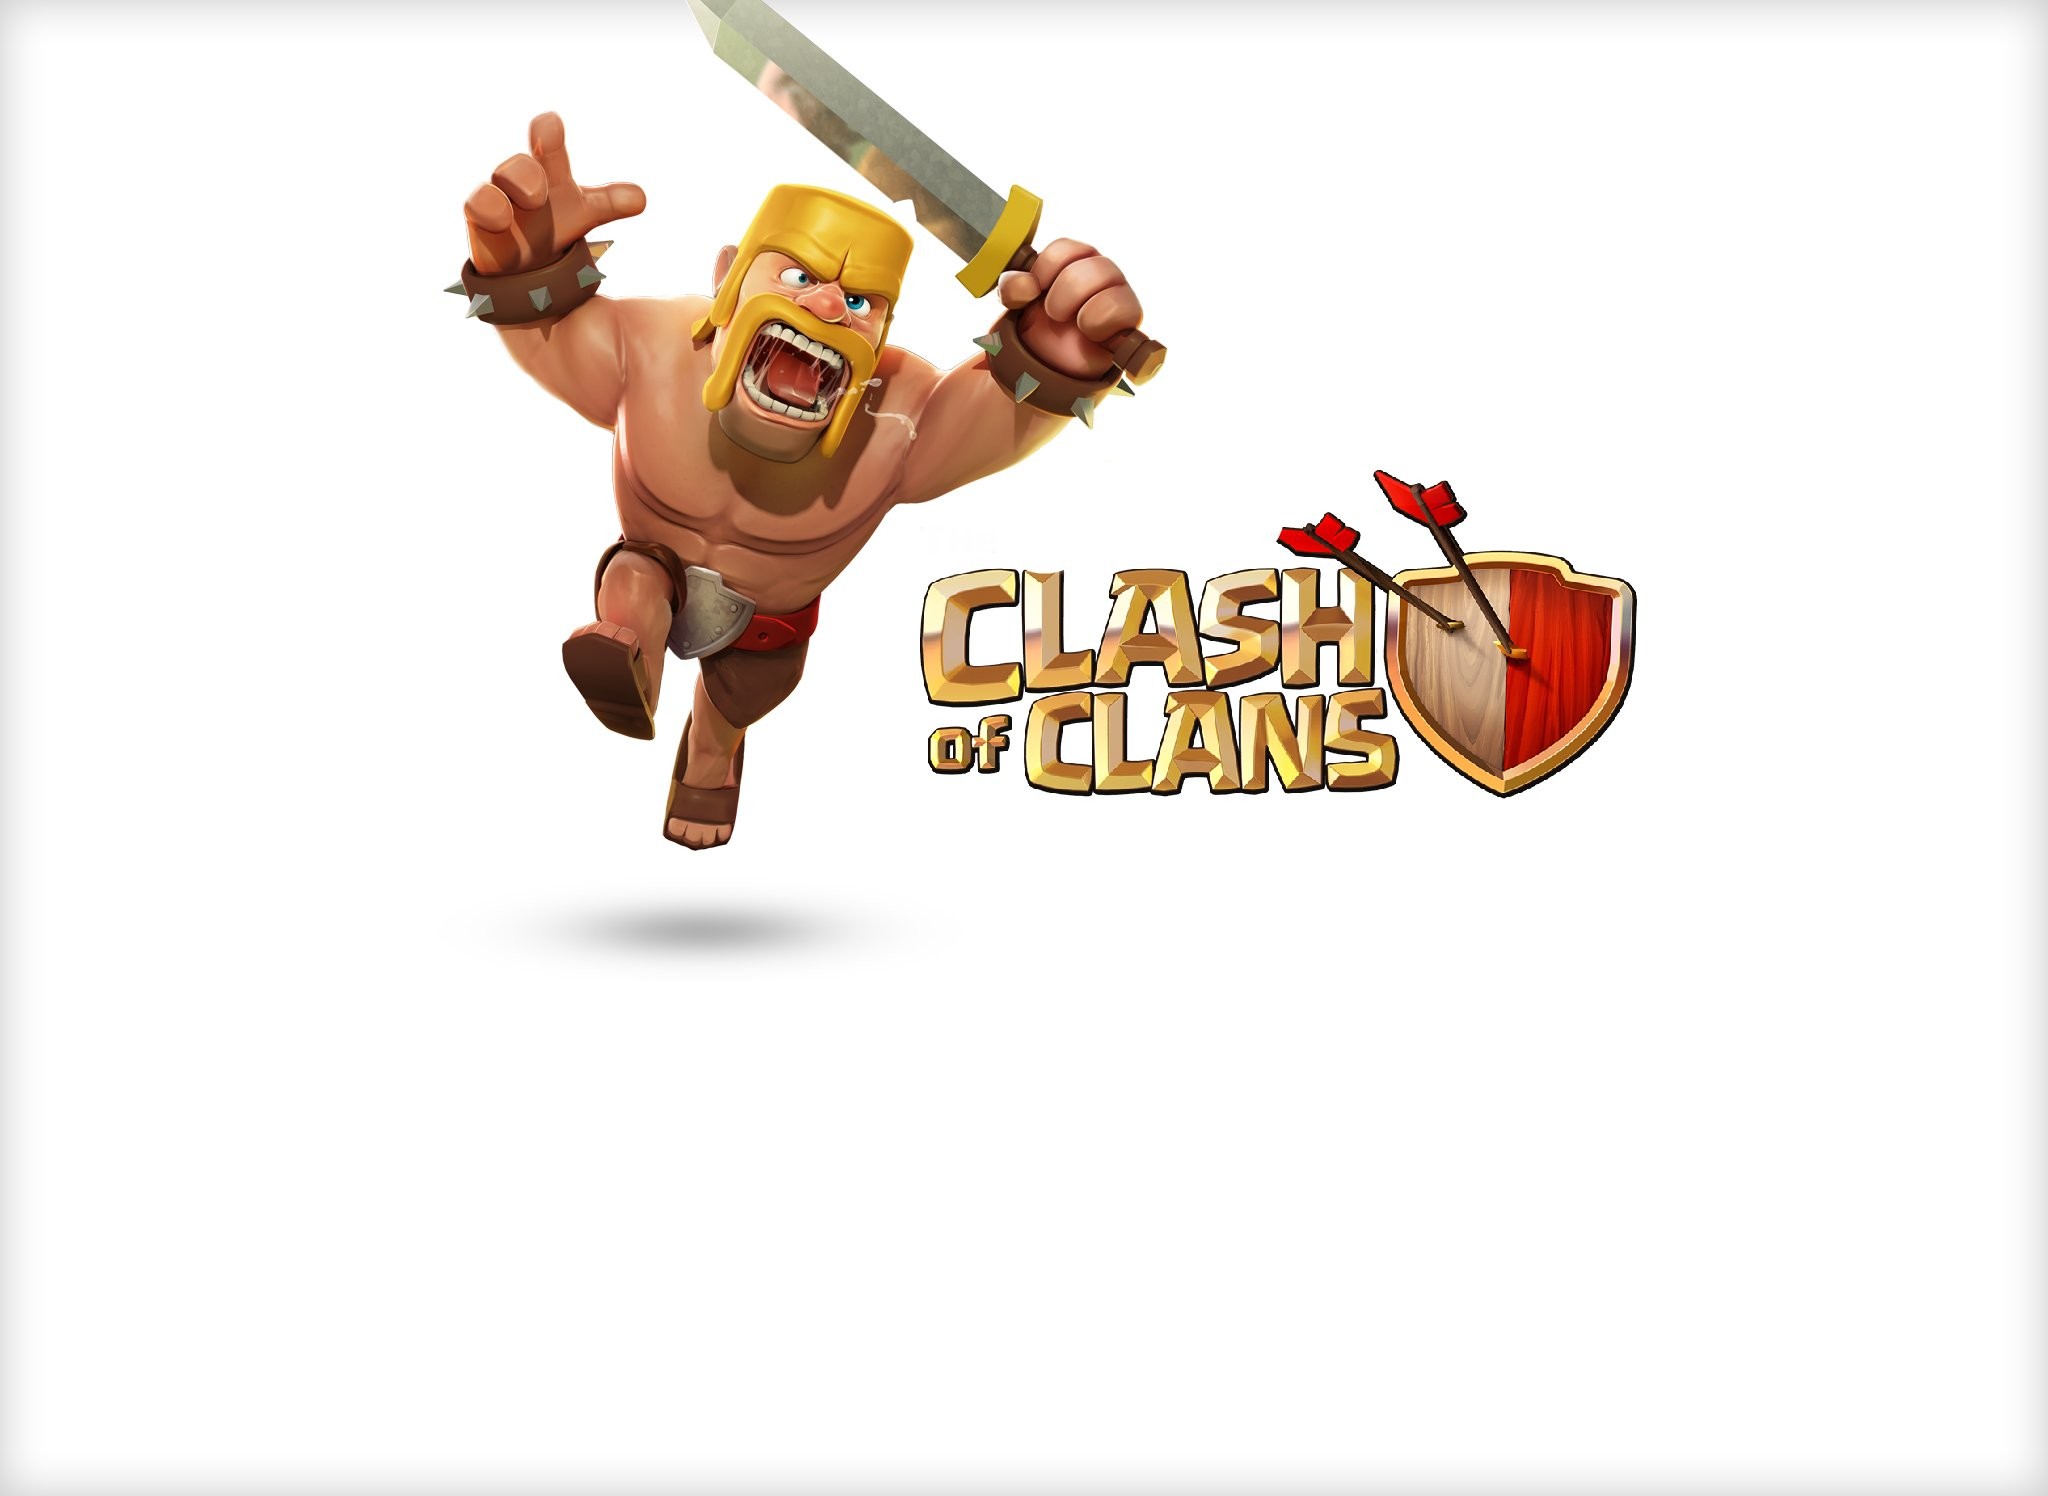 CLASH OF CLANS fantasy fighting family action adventure strategy 1clashclans warrior poster wallpaper 580519 WallpaperUP